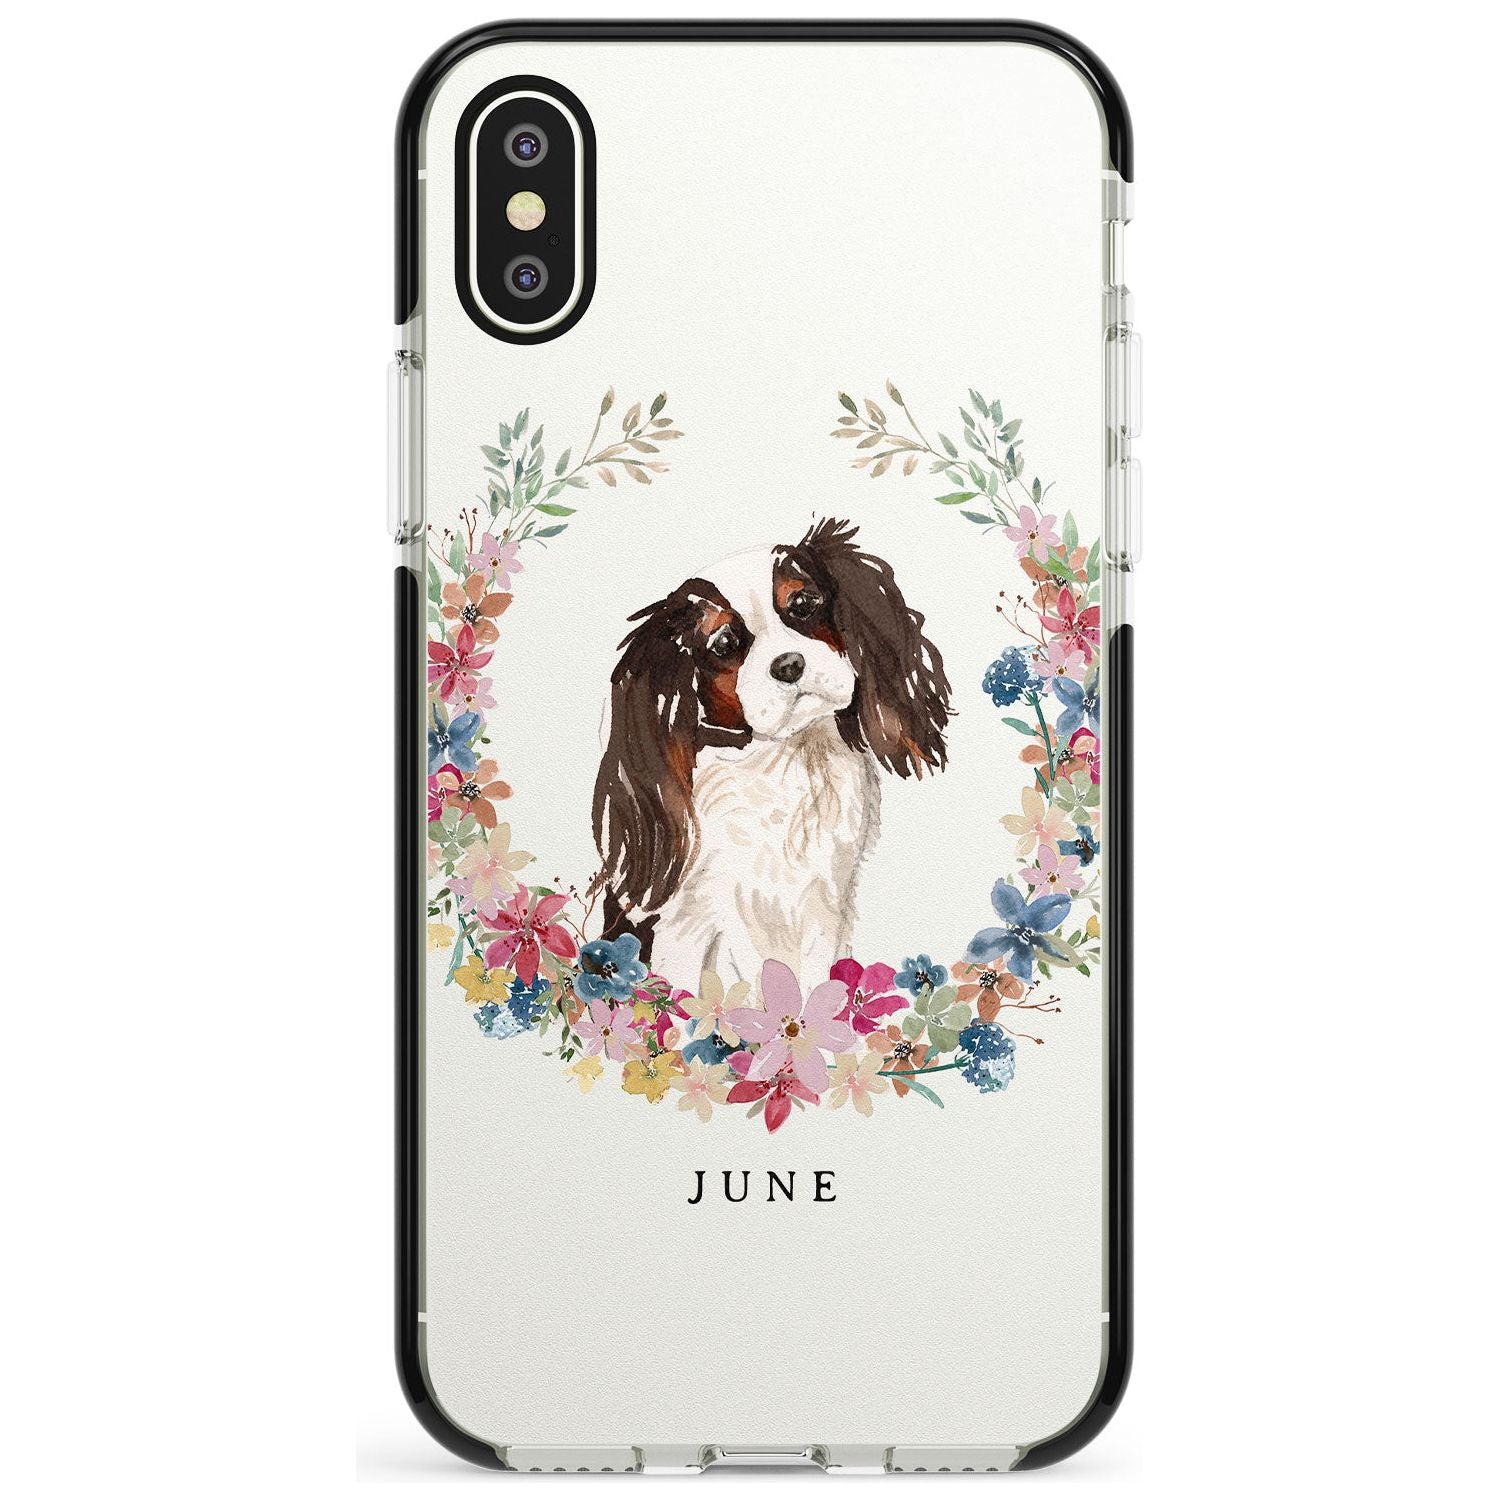 Tri Coloured King Charles Watercolour Dog Portrait Black Impact Phone Case for iPhone X XS Max XR